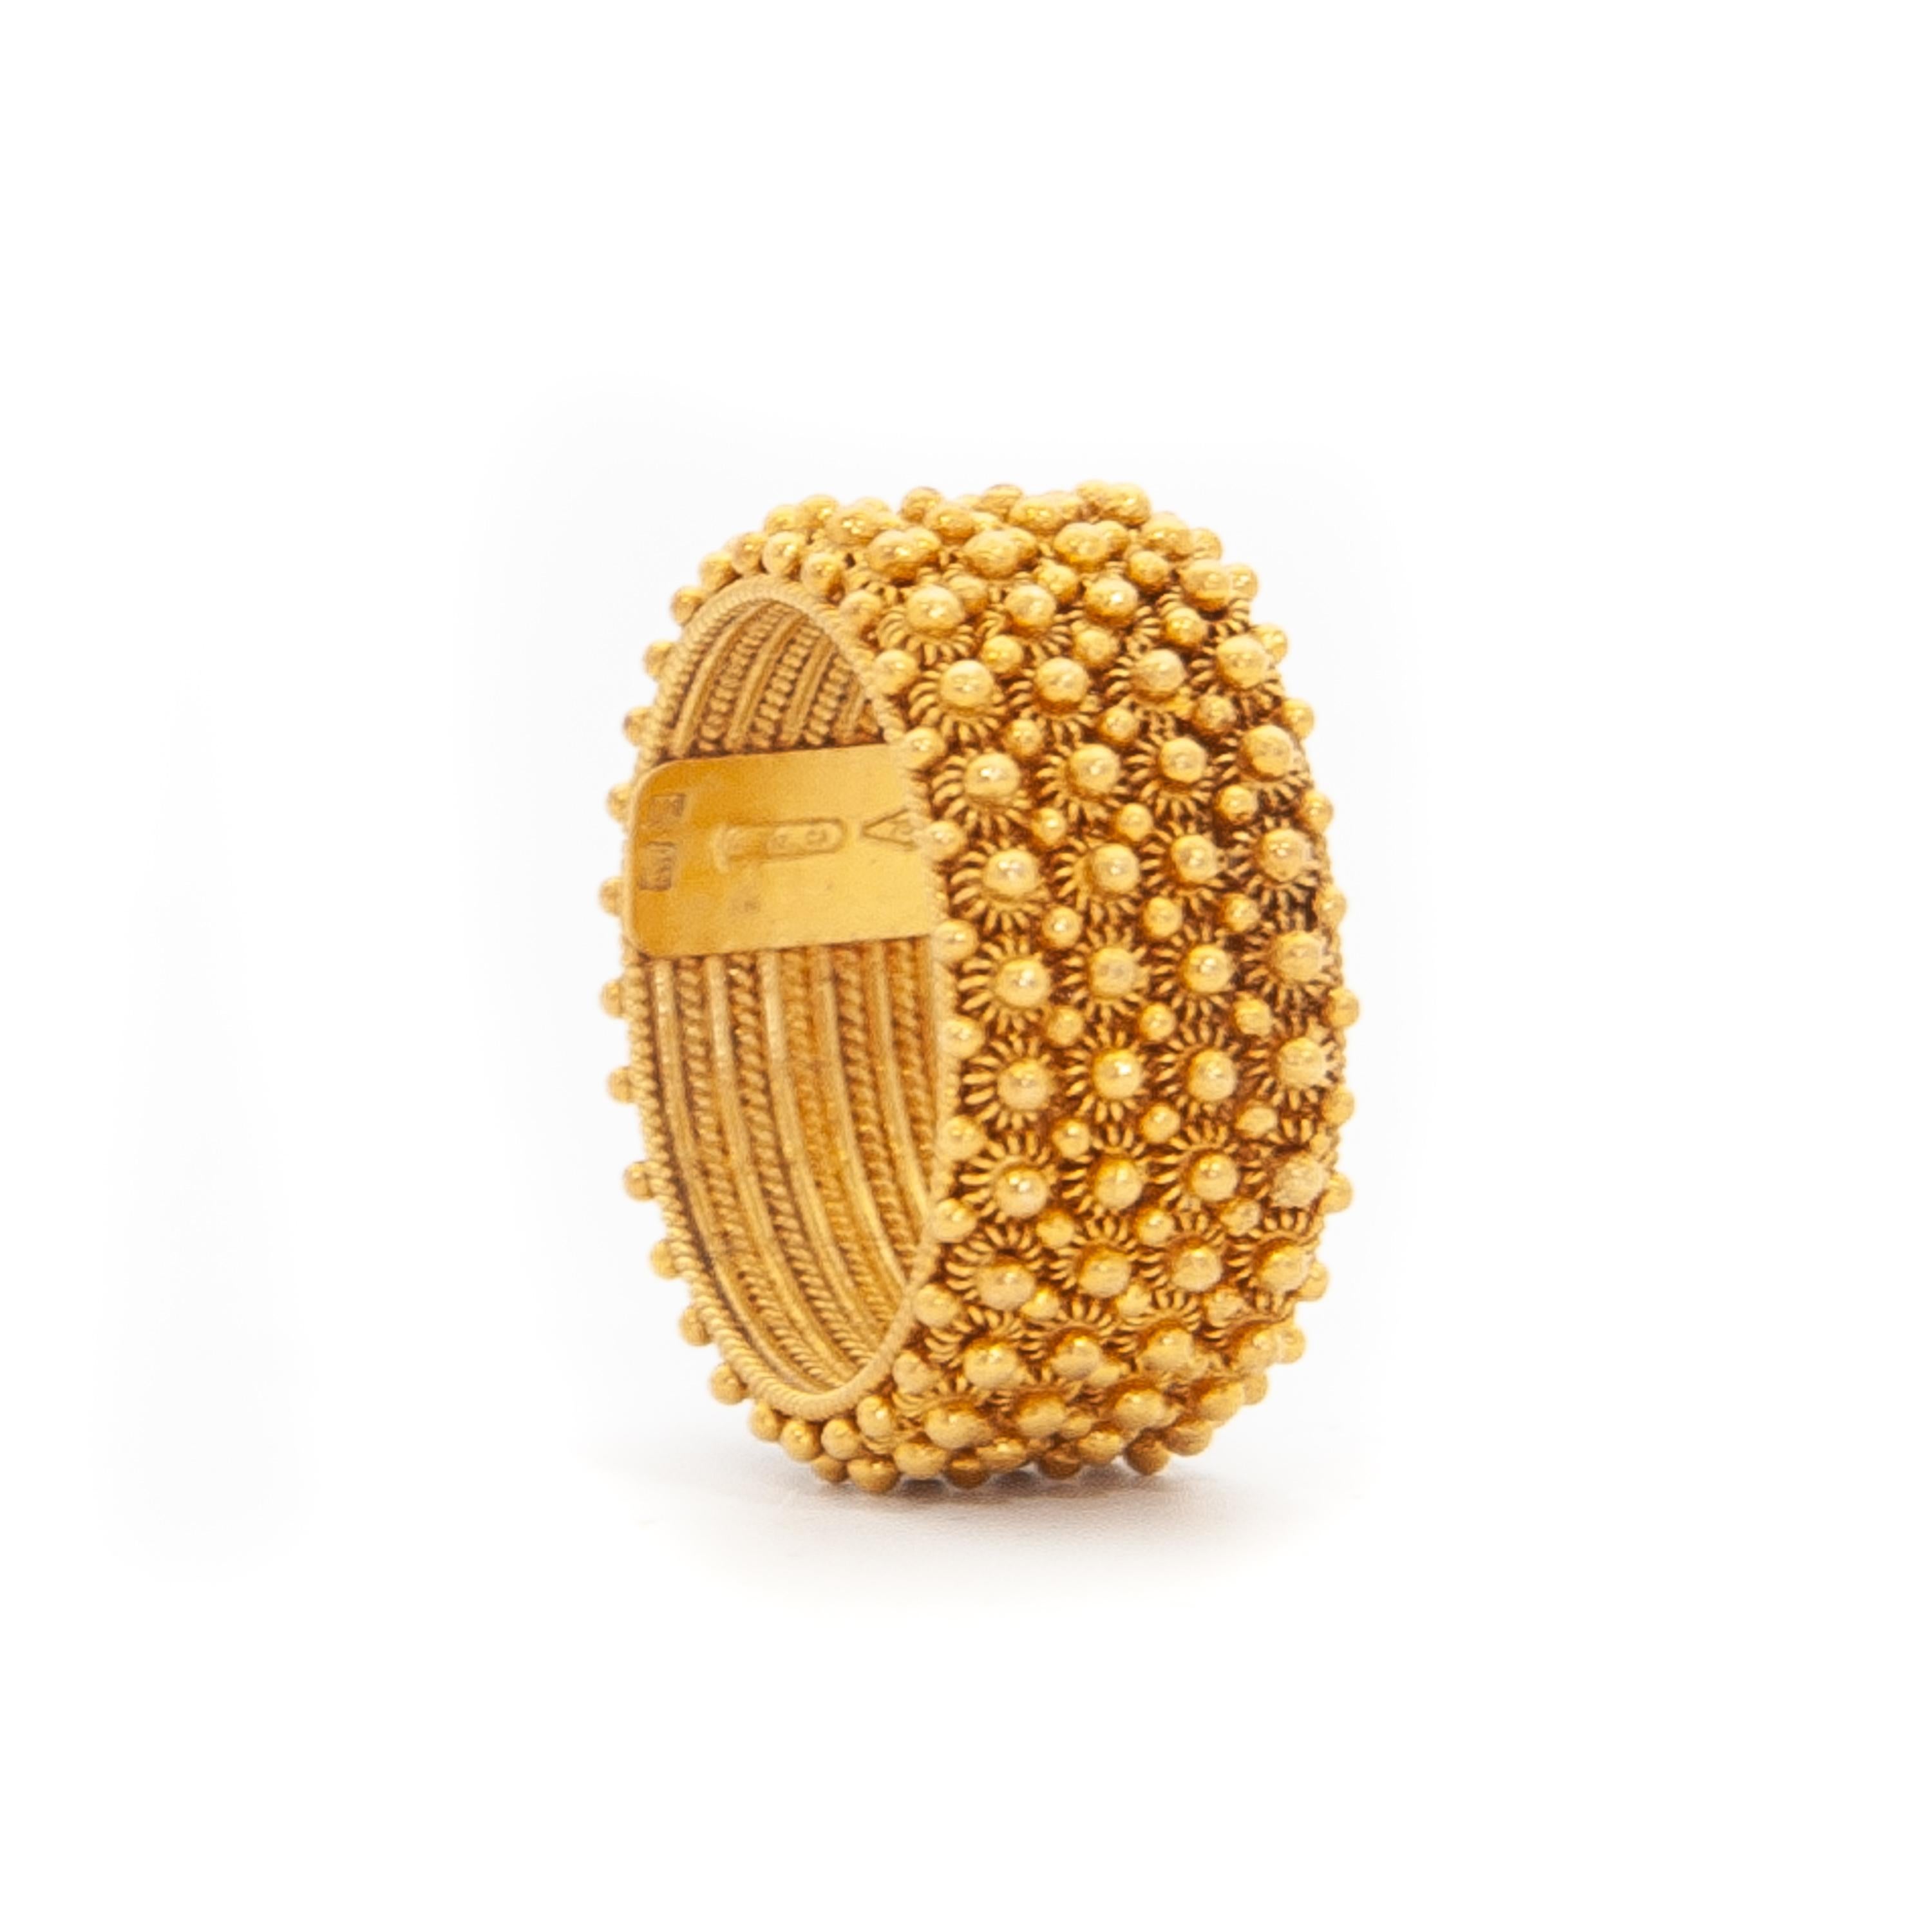 A beautiful Etruscan Revival handcrafted 18 karat gold cannetille band ring. The twisted threads and balls are soldered together into this gorgeous design. The knots symbolizes wheat, which is a symbol of abundance and prosperity. 

The ring is in